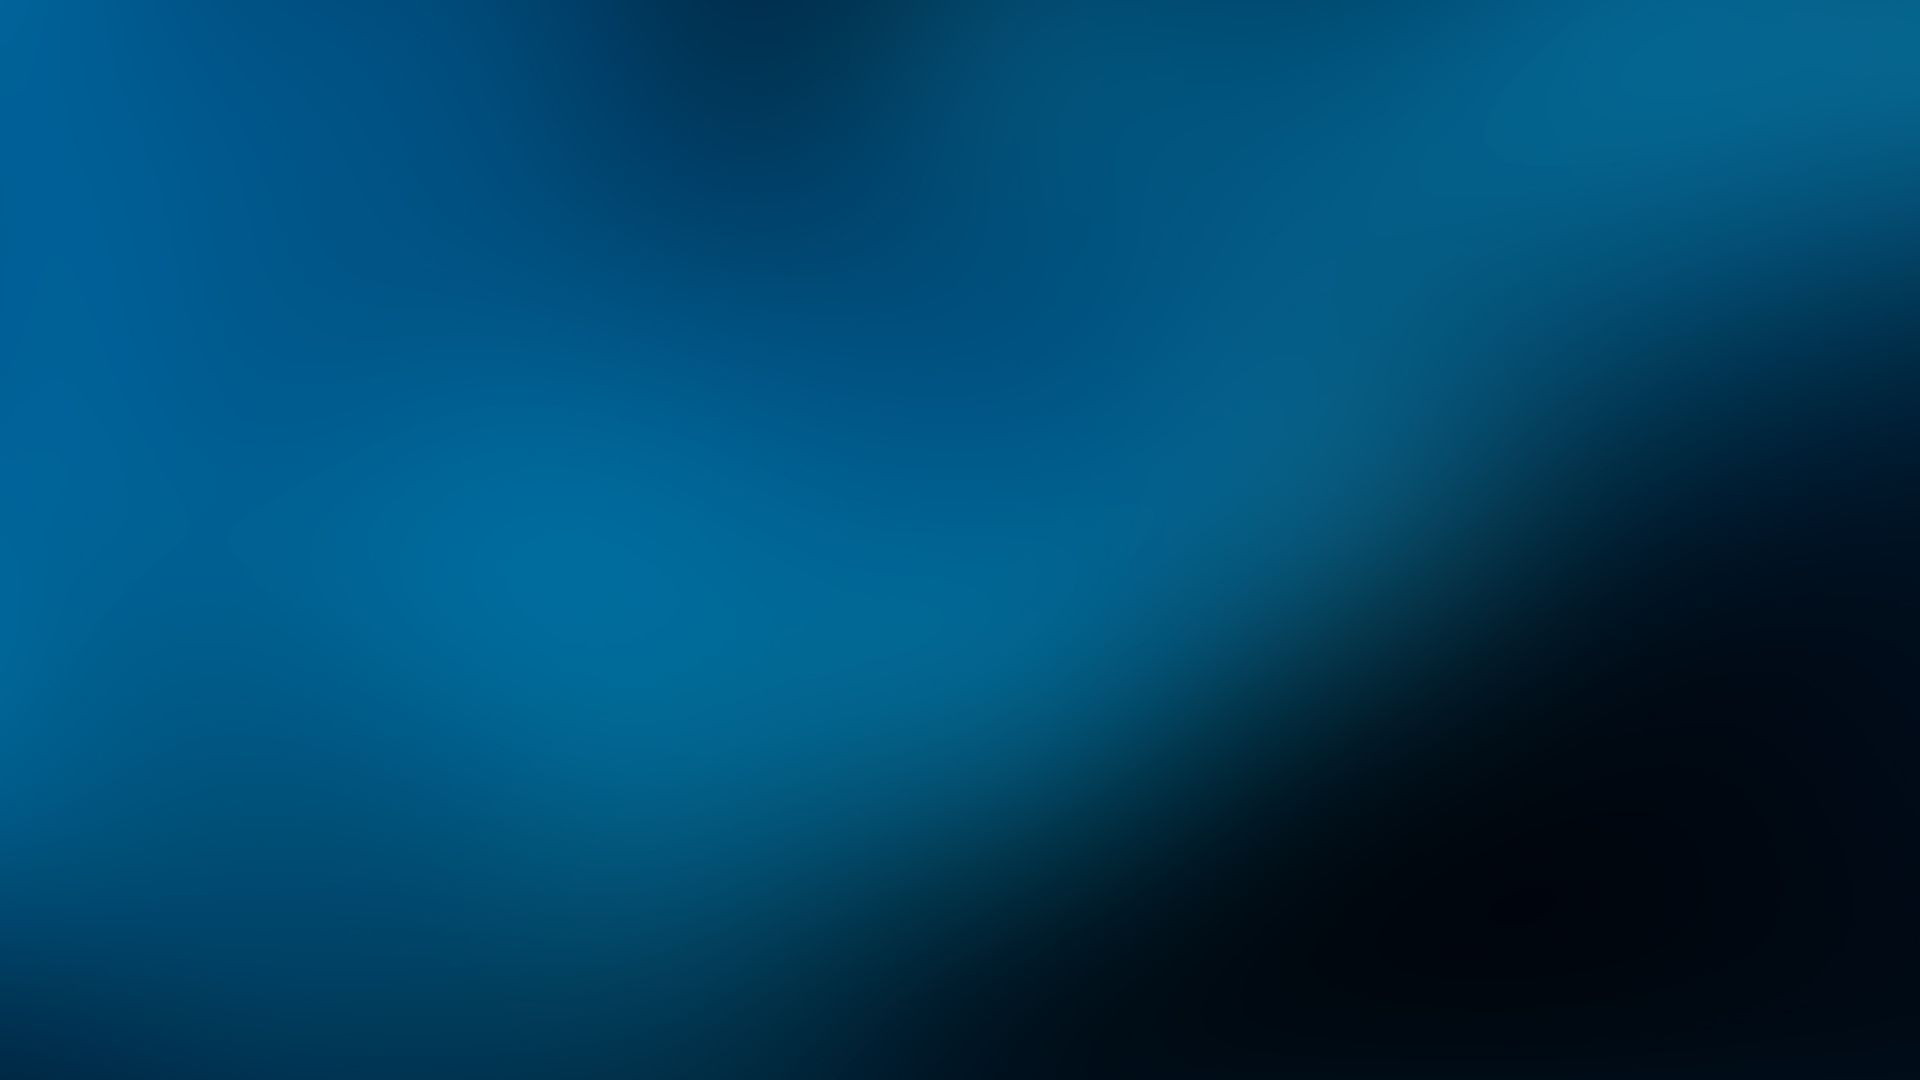 Wallpaper Abstract, blue and black, gradient, blur